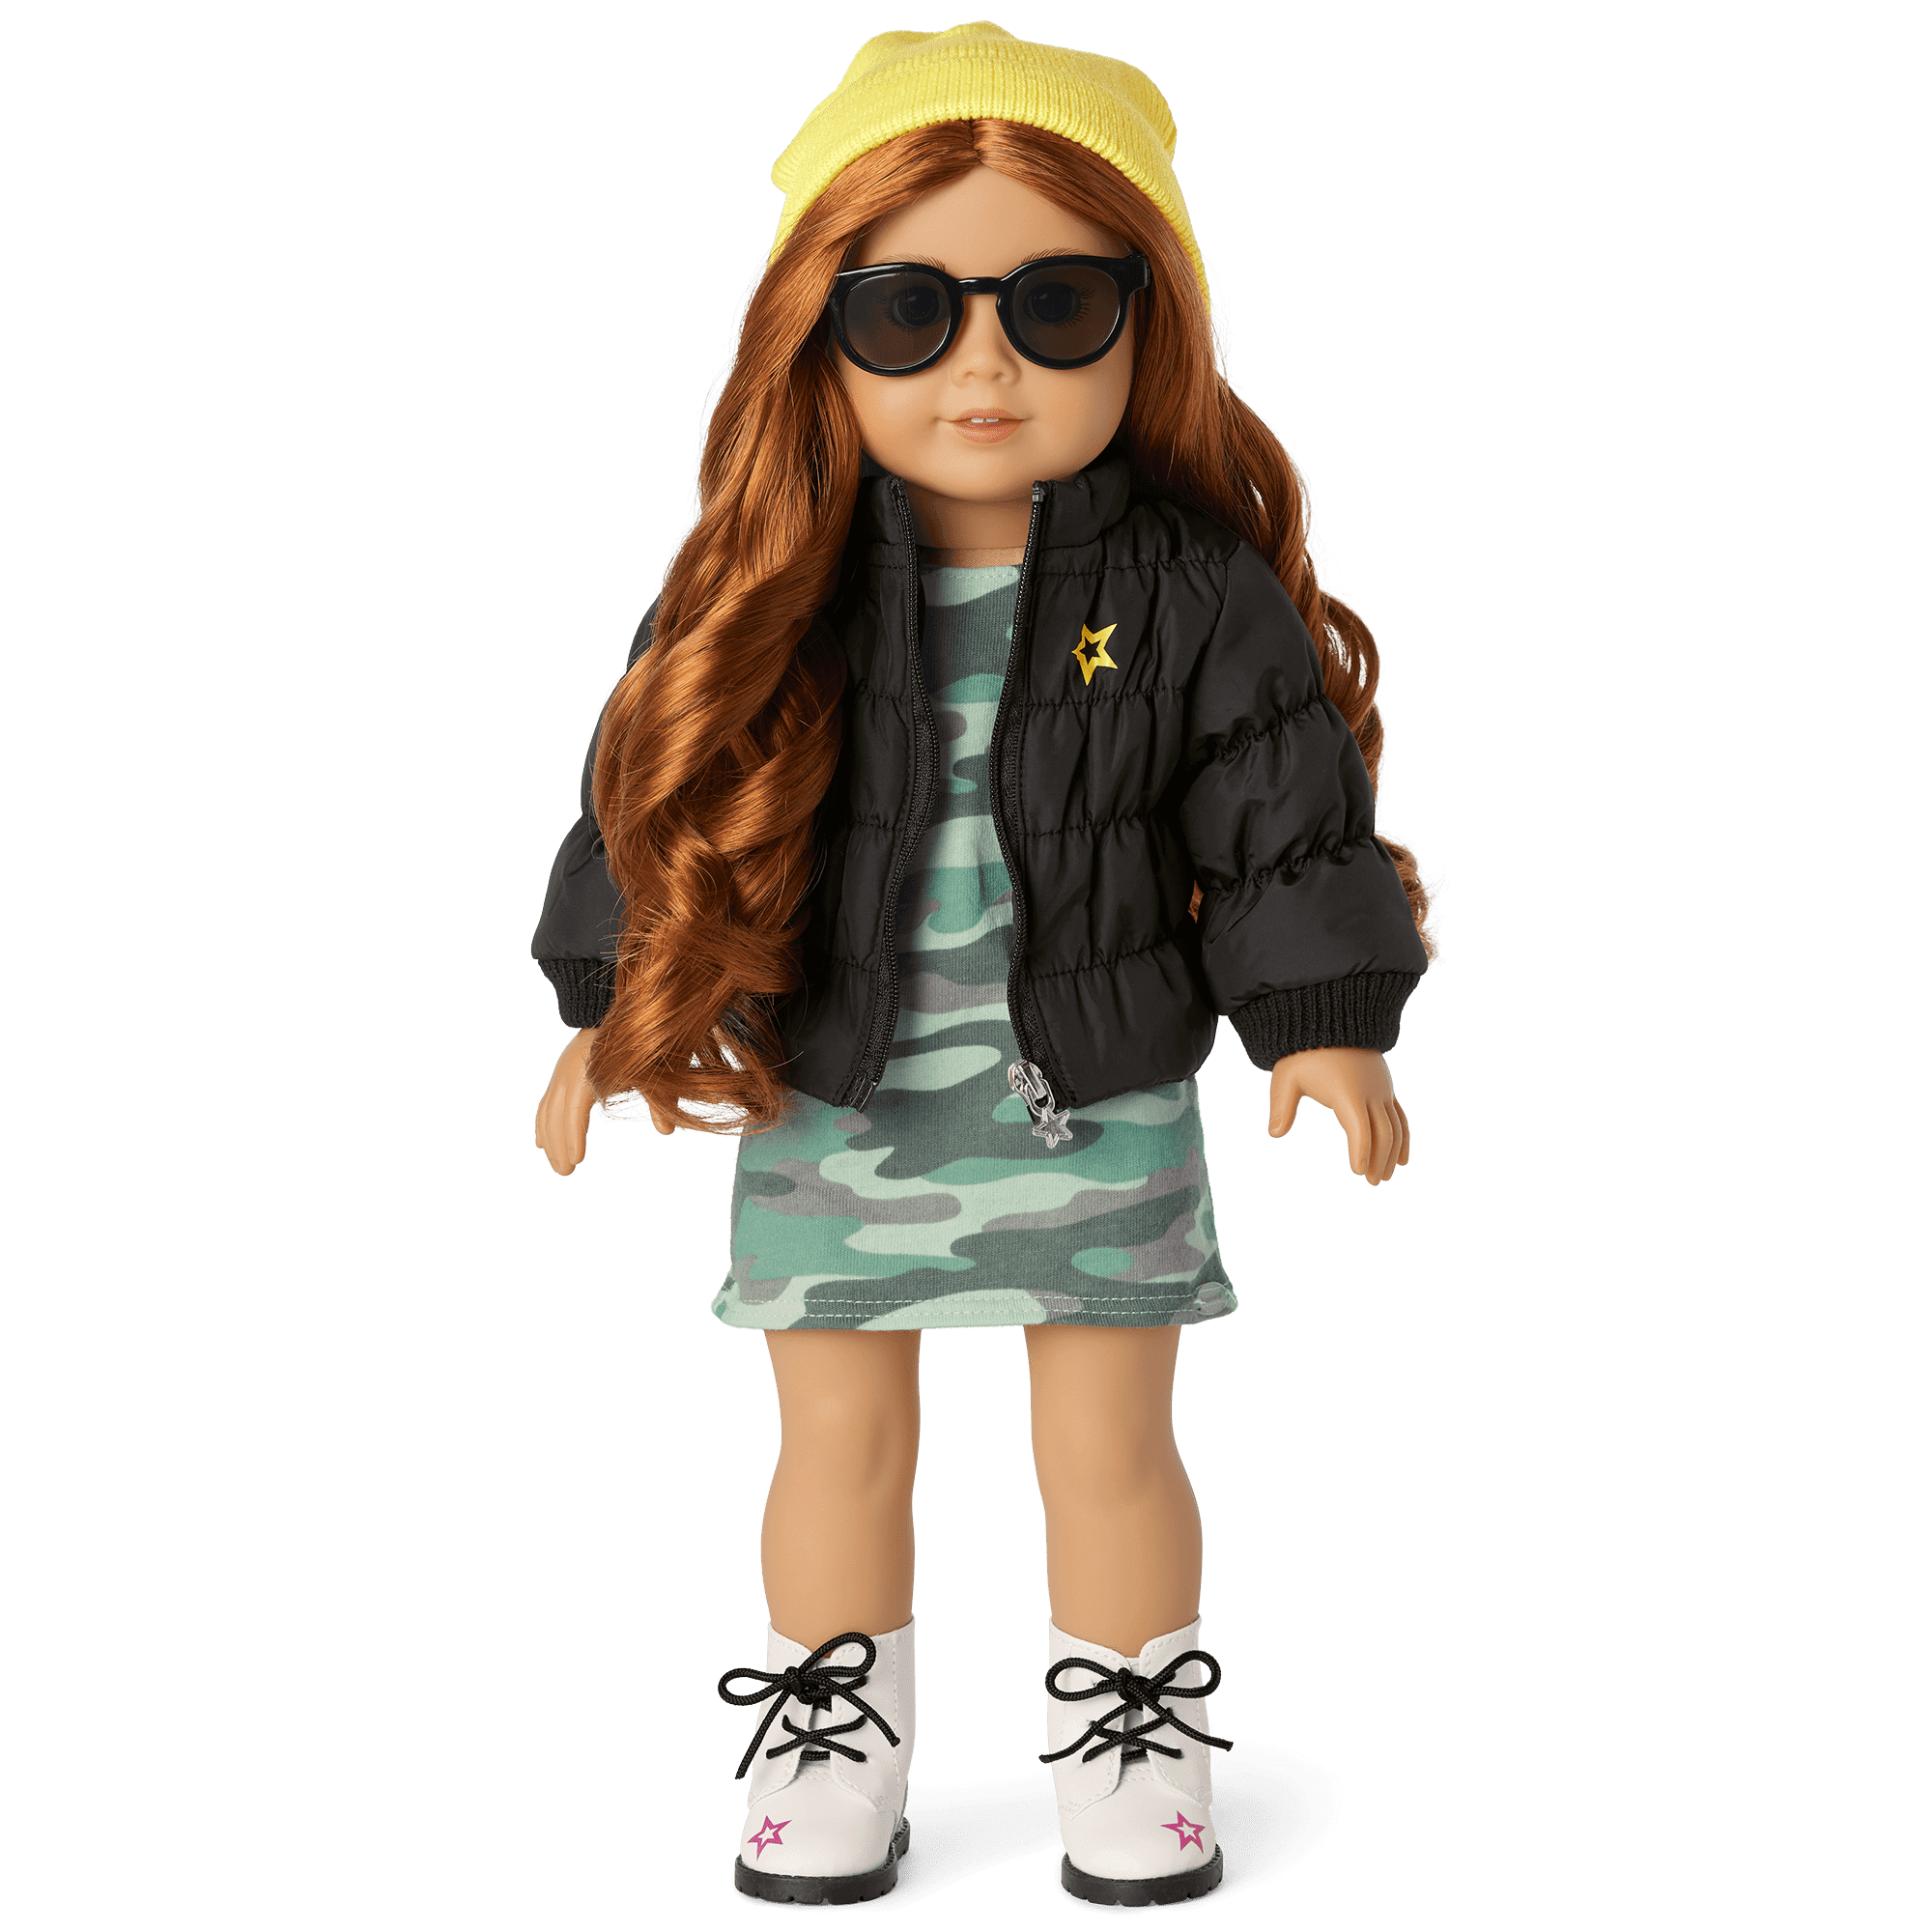 Show Your Strong Side Outfit & Accessories for 18-inch Dolls